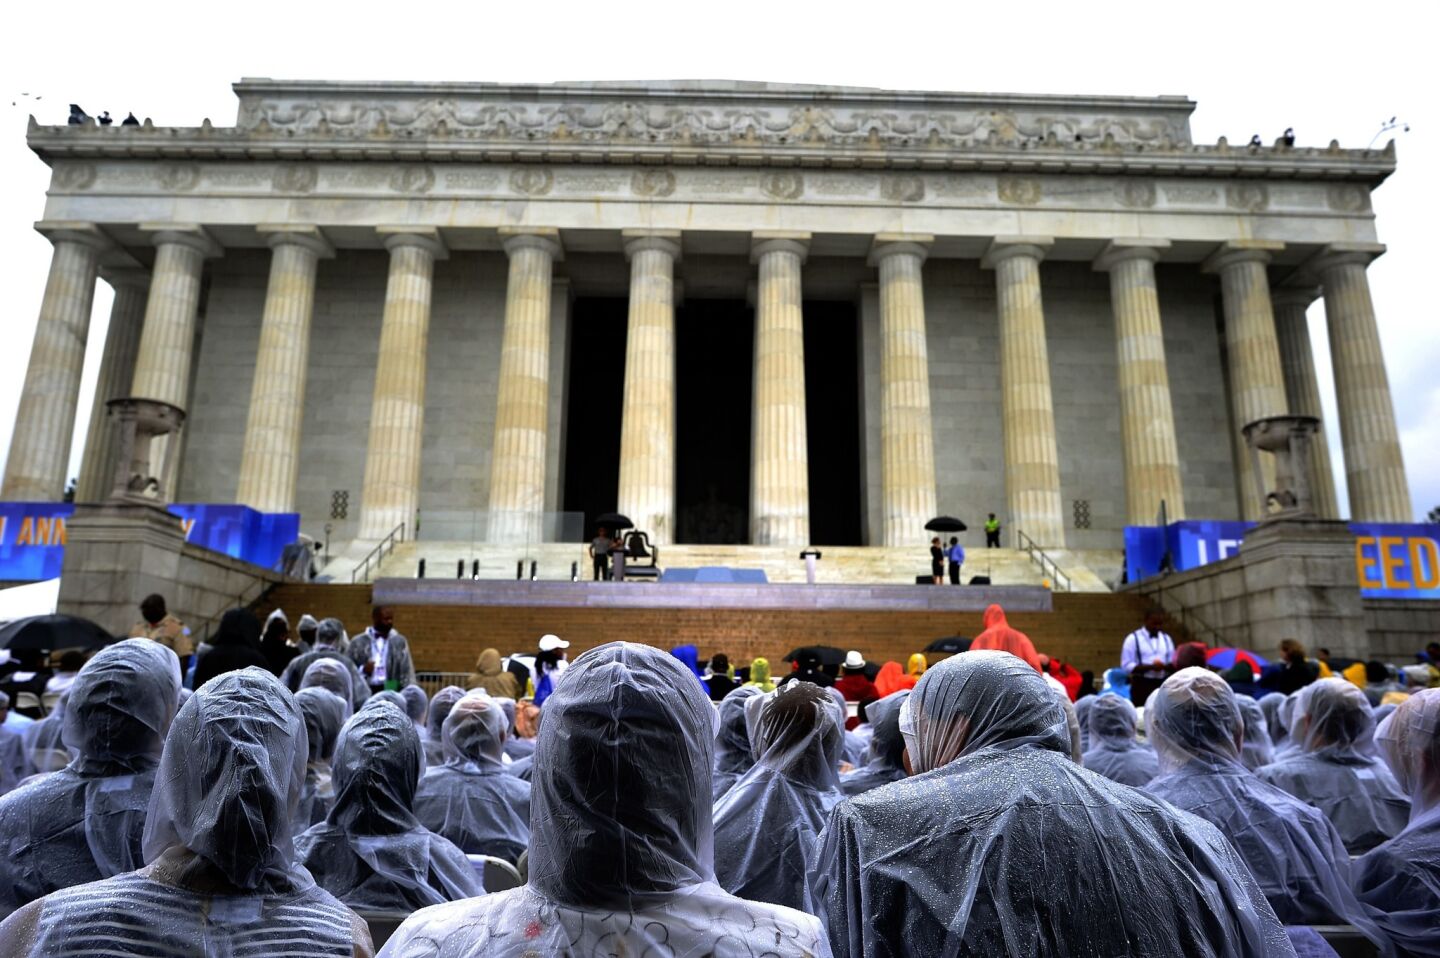 People cover themselves with rain ponchos in front of the Lincoln Memorial on the 50th anniversary of the March on Washington.